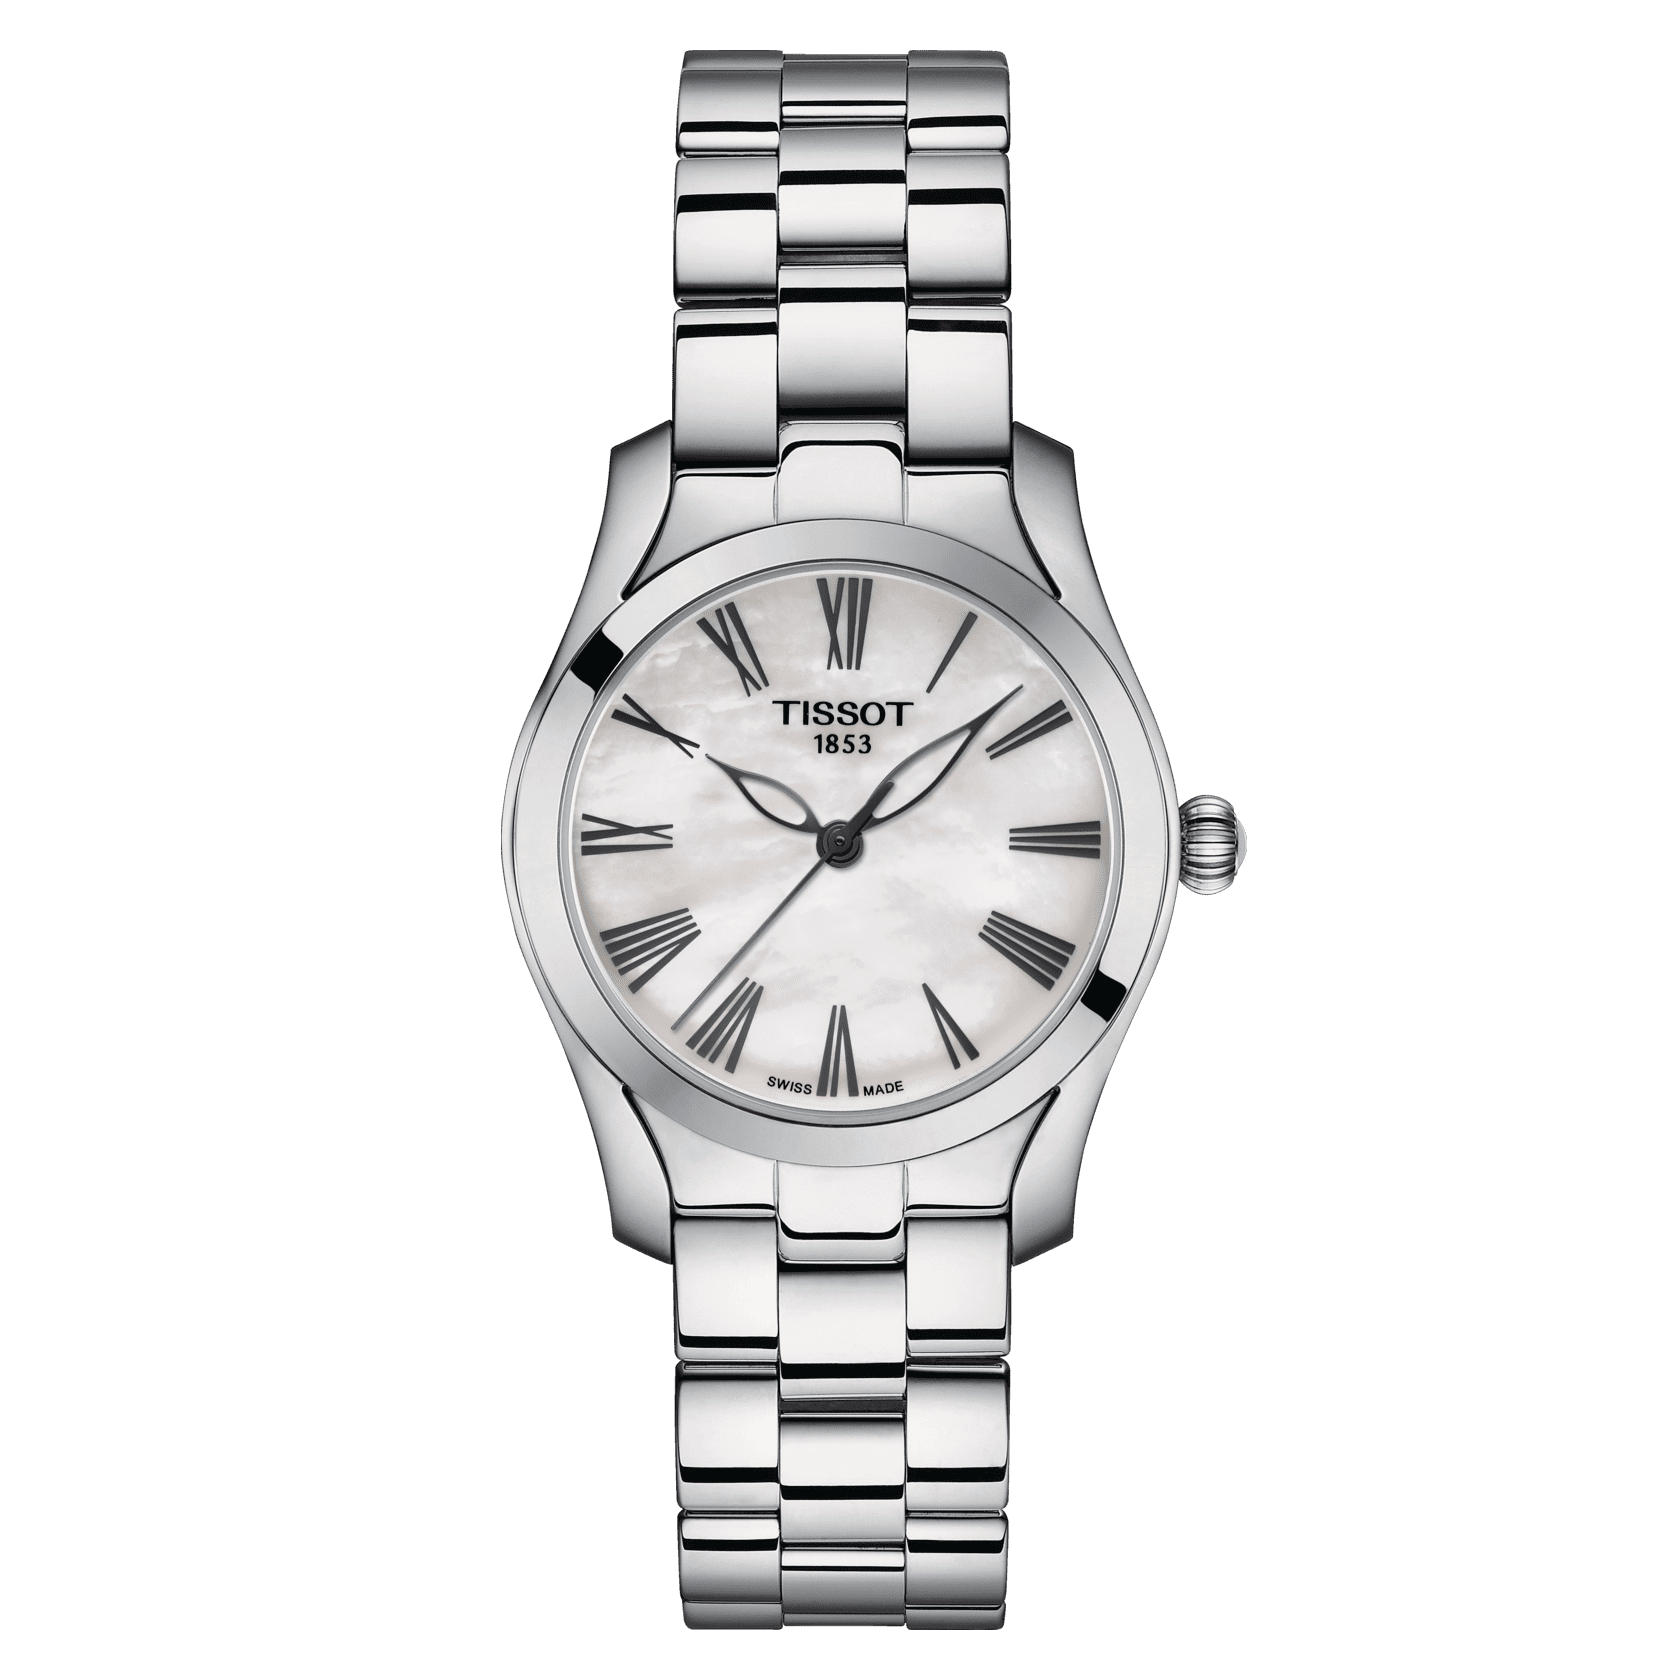 TISSOT T-WAVE QUARTZ (T112.210.11.113.00)
30mm/316L stainless steel case
Domed scratch-resistant sapphire crystal
Swiss quartz/ETA F04.111
EOL (battery end-of-life indicator)
White mother-of-pearl with roman
Stainless steel with butterfly clasp with